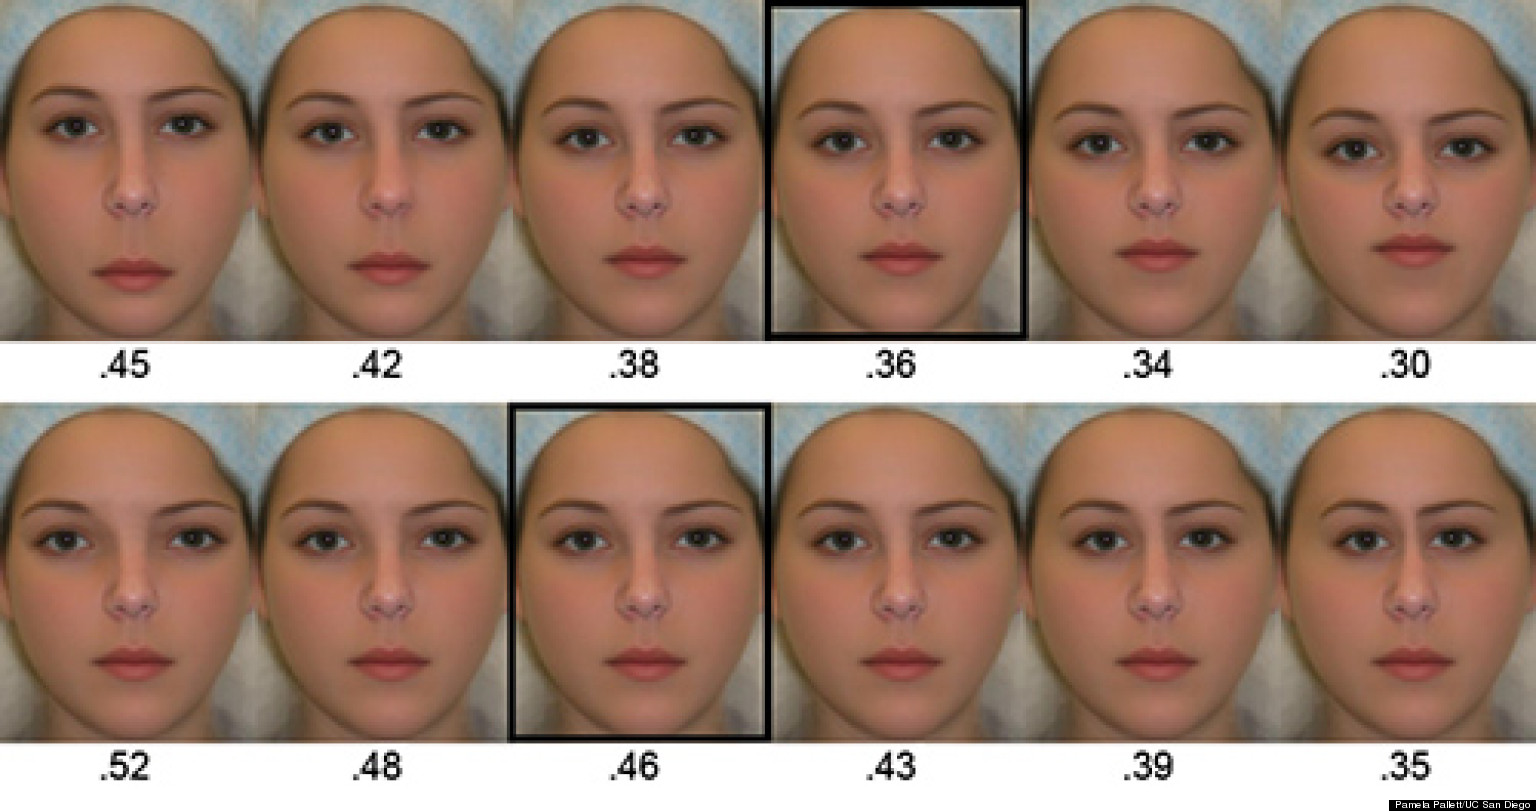 Science Of Beauty: 4 Physical Traits That Help Define Female Facial ...